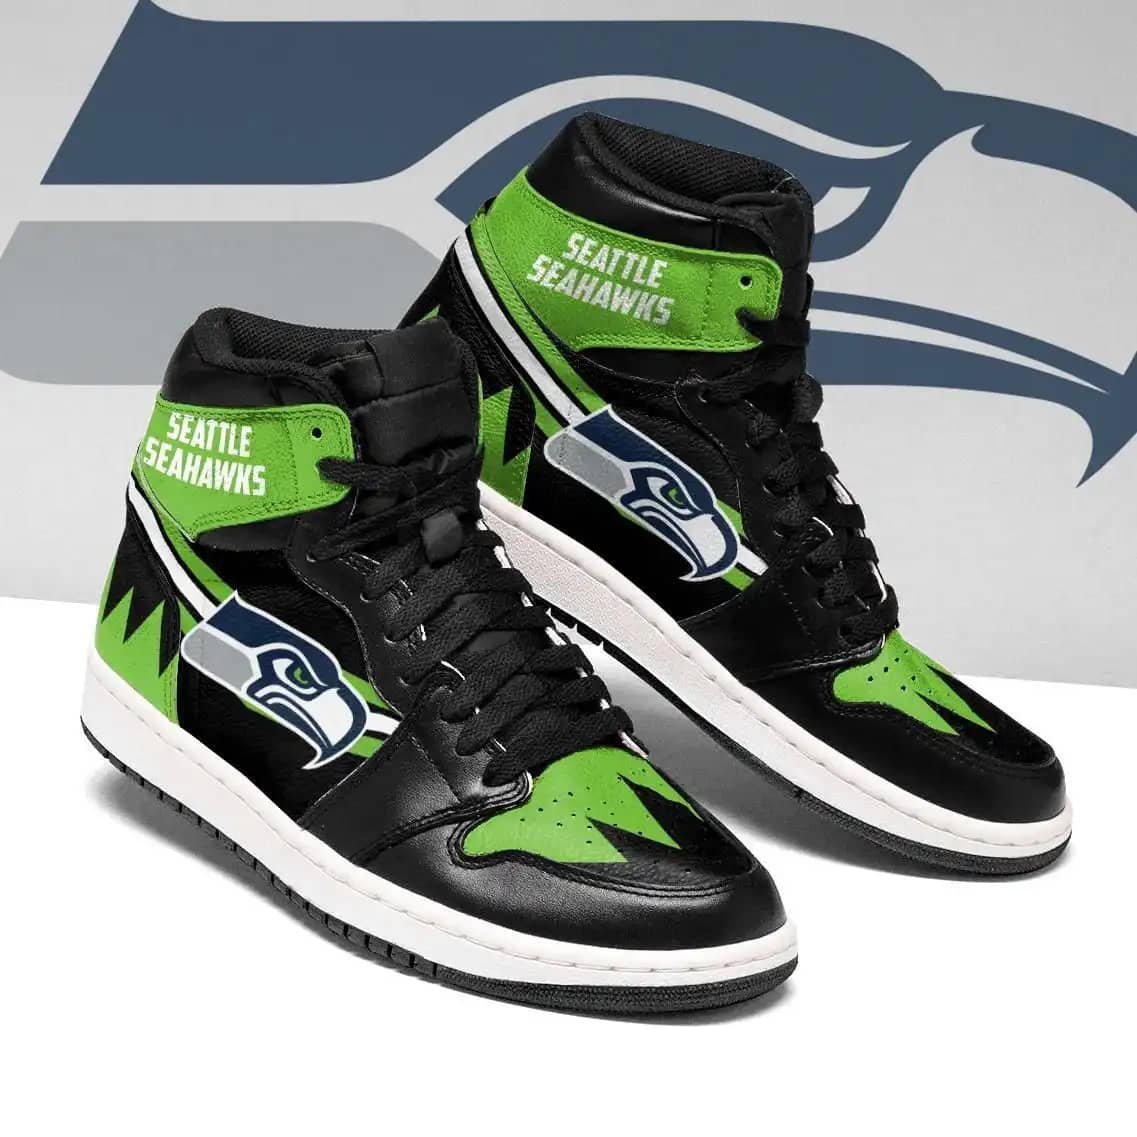 Seattle Seahawks Nfl Football Team Perfect Gift For Sports Fans Air Jordan Shoes